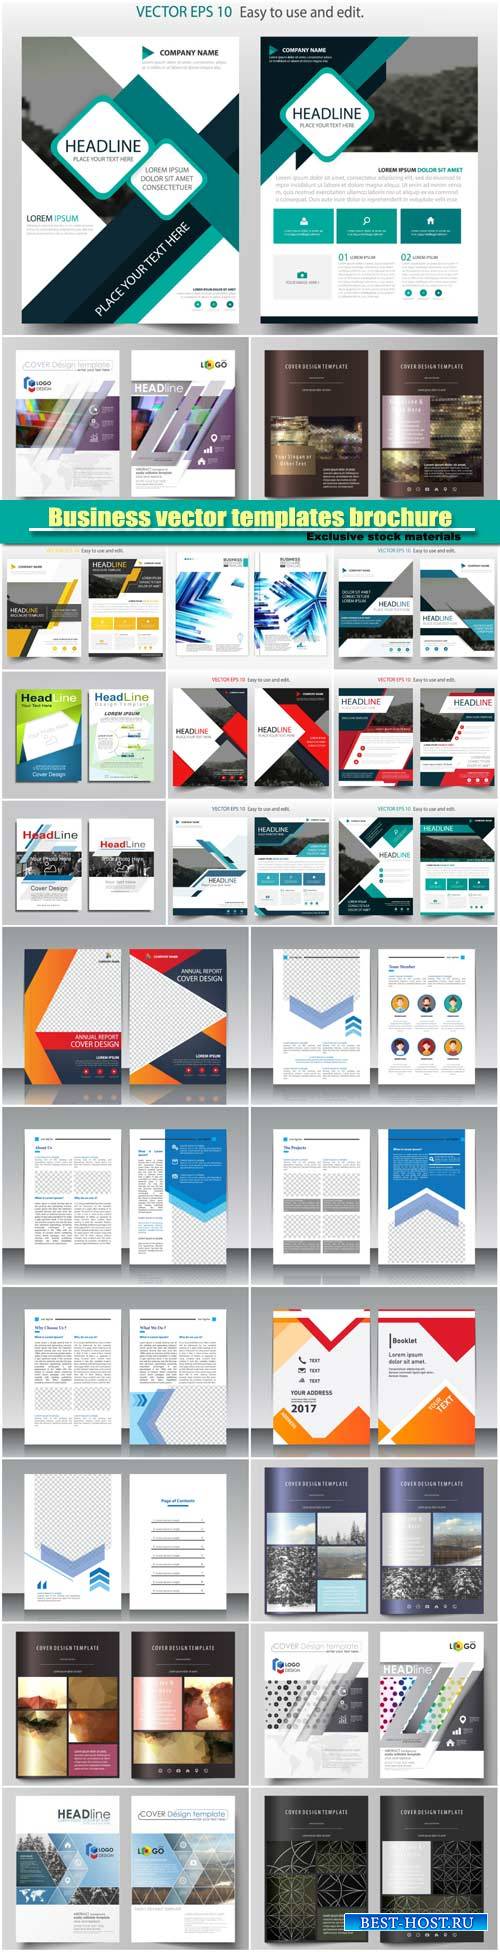 Business vector templates brochure, magazine, flyer, booklet or annual report